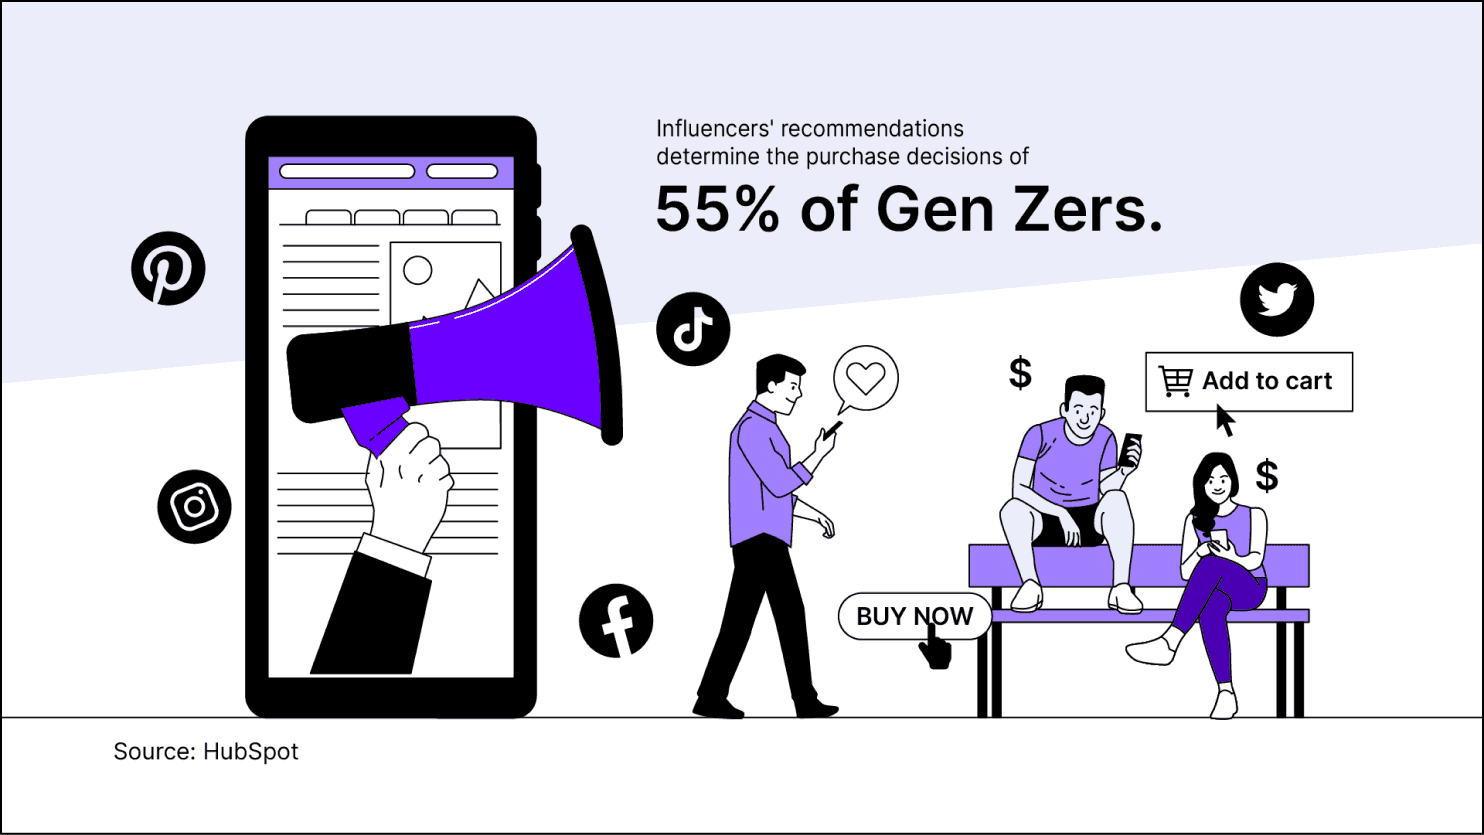 Influencers' recommendations affect Gen Zers’ purchasing decisions.